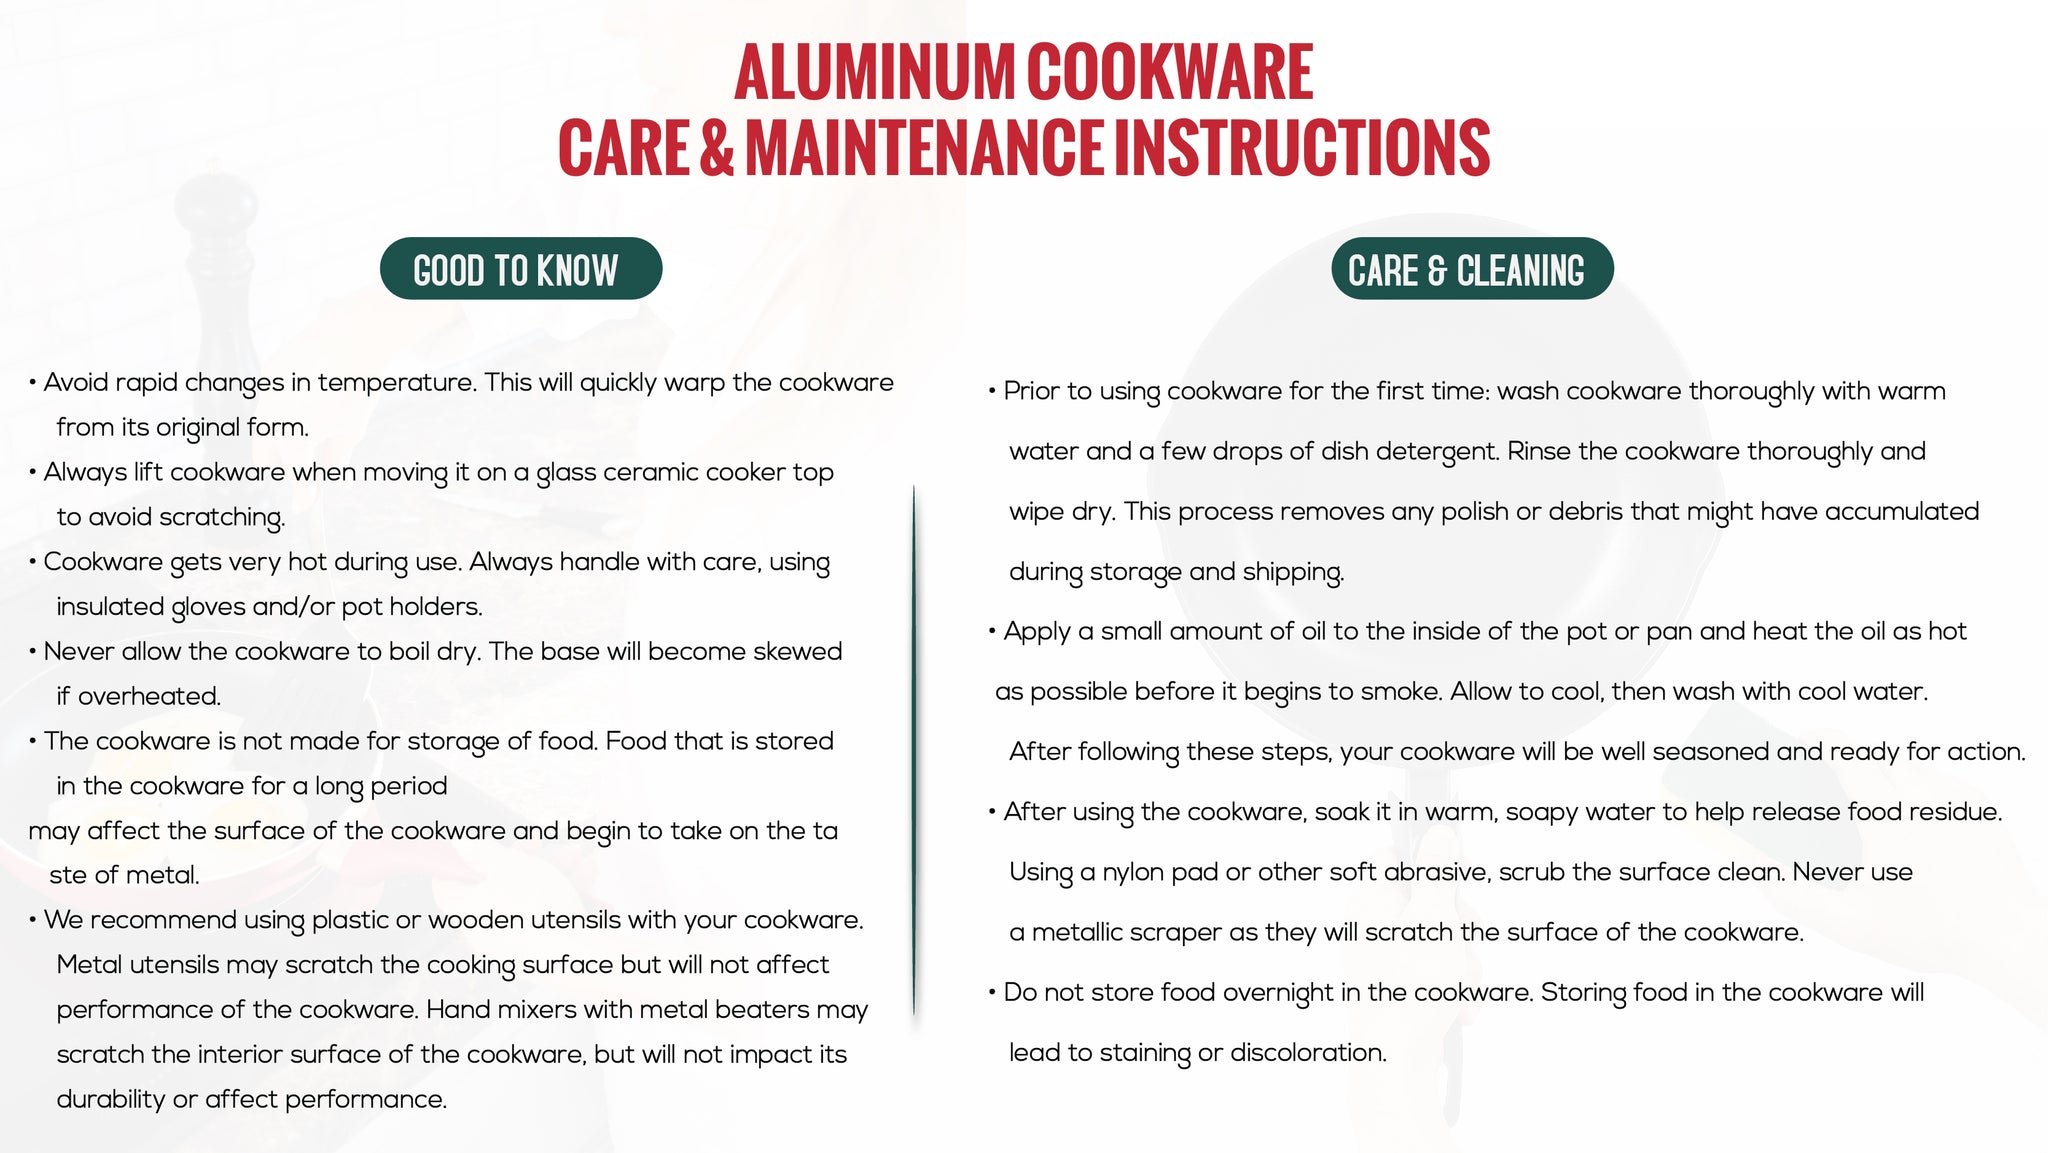 Cares to use aluminum cookware